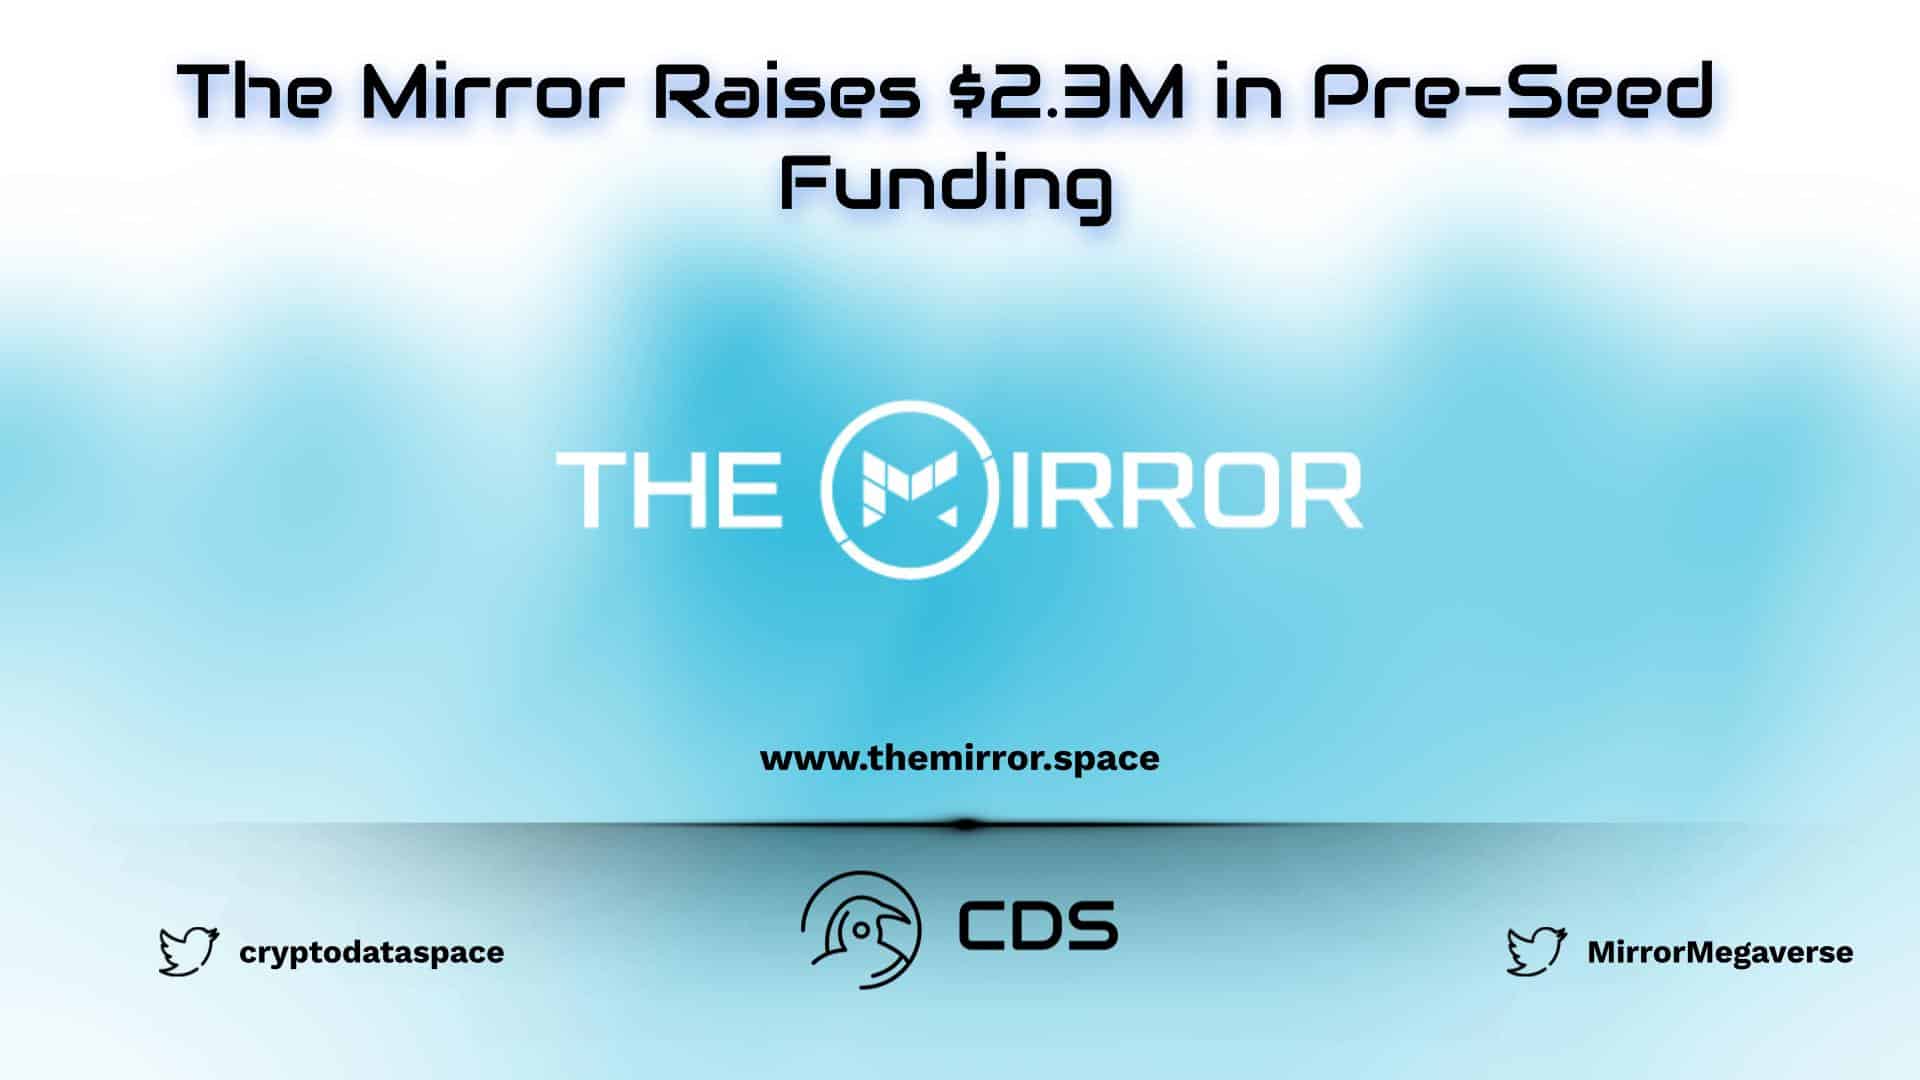 The Mirror Raises $2.3M in Pre-Seed Funding